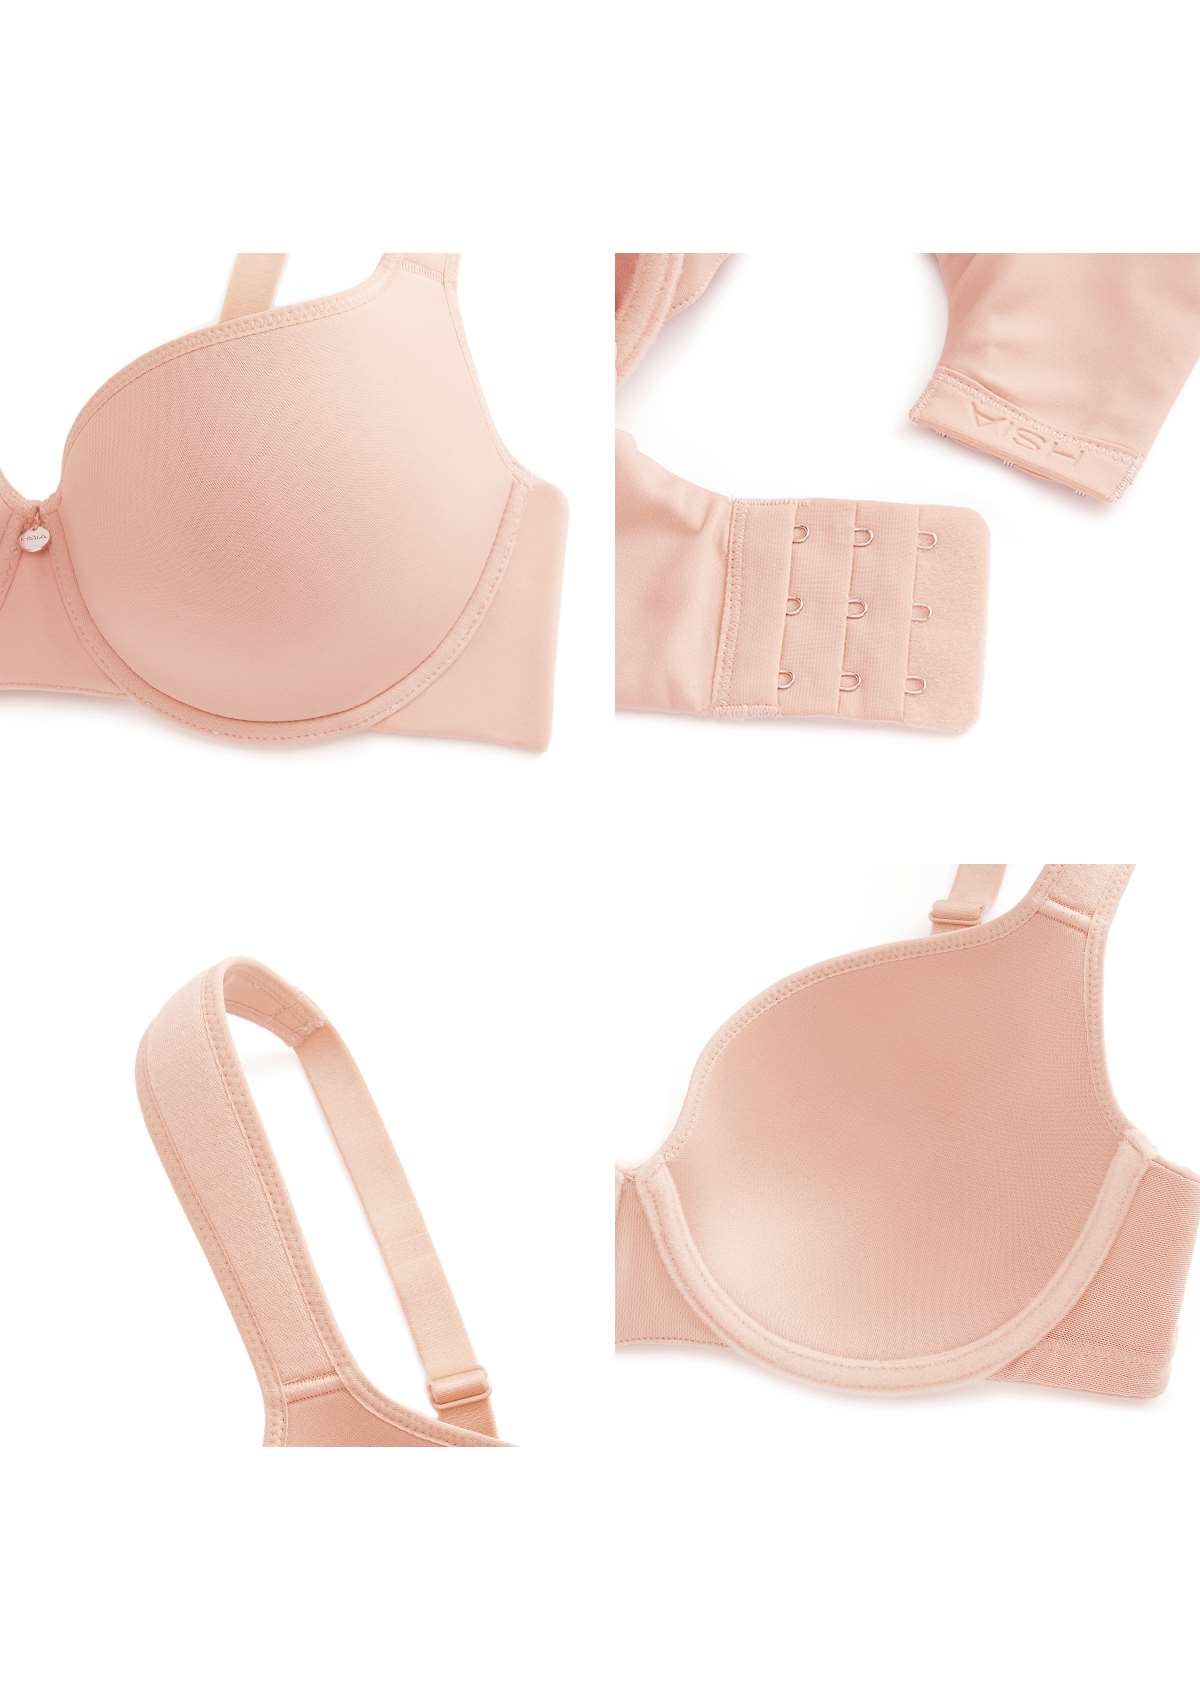 HSIA Patricia Smooth Classic T-shirt Lightly Padded Minimizer Bra - Light Pink / 36 / D